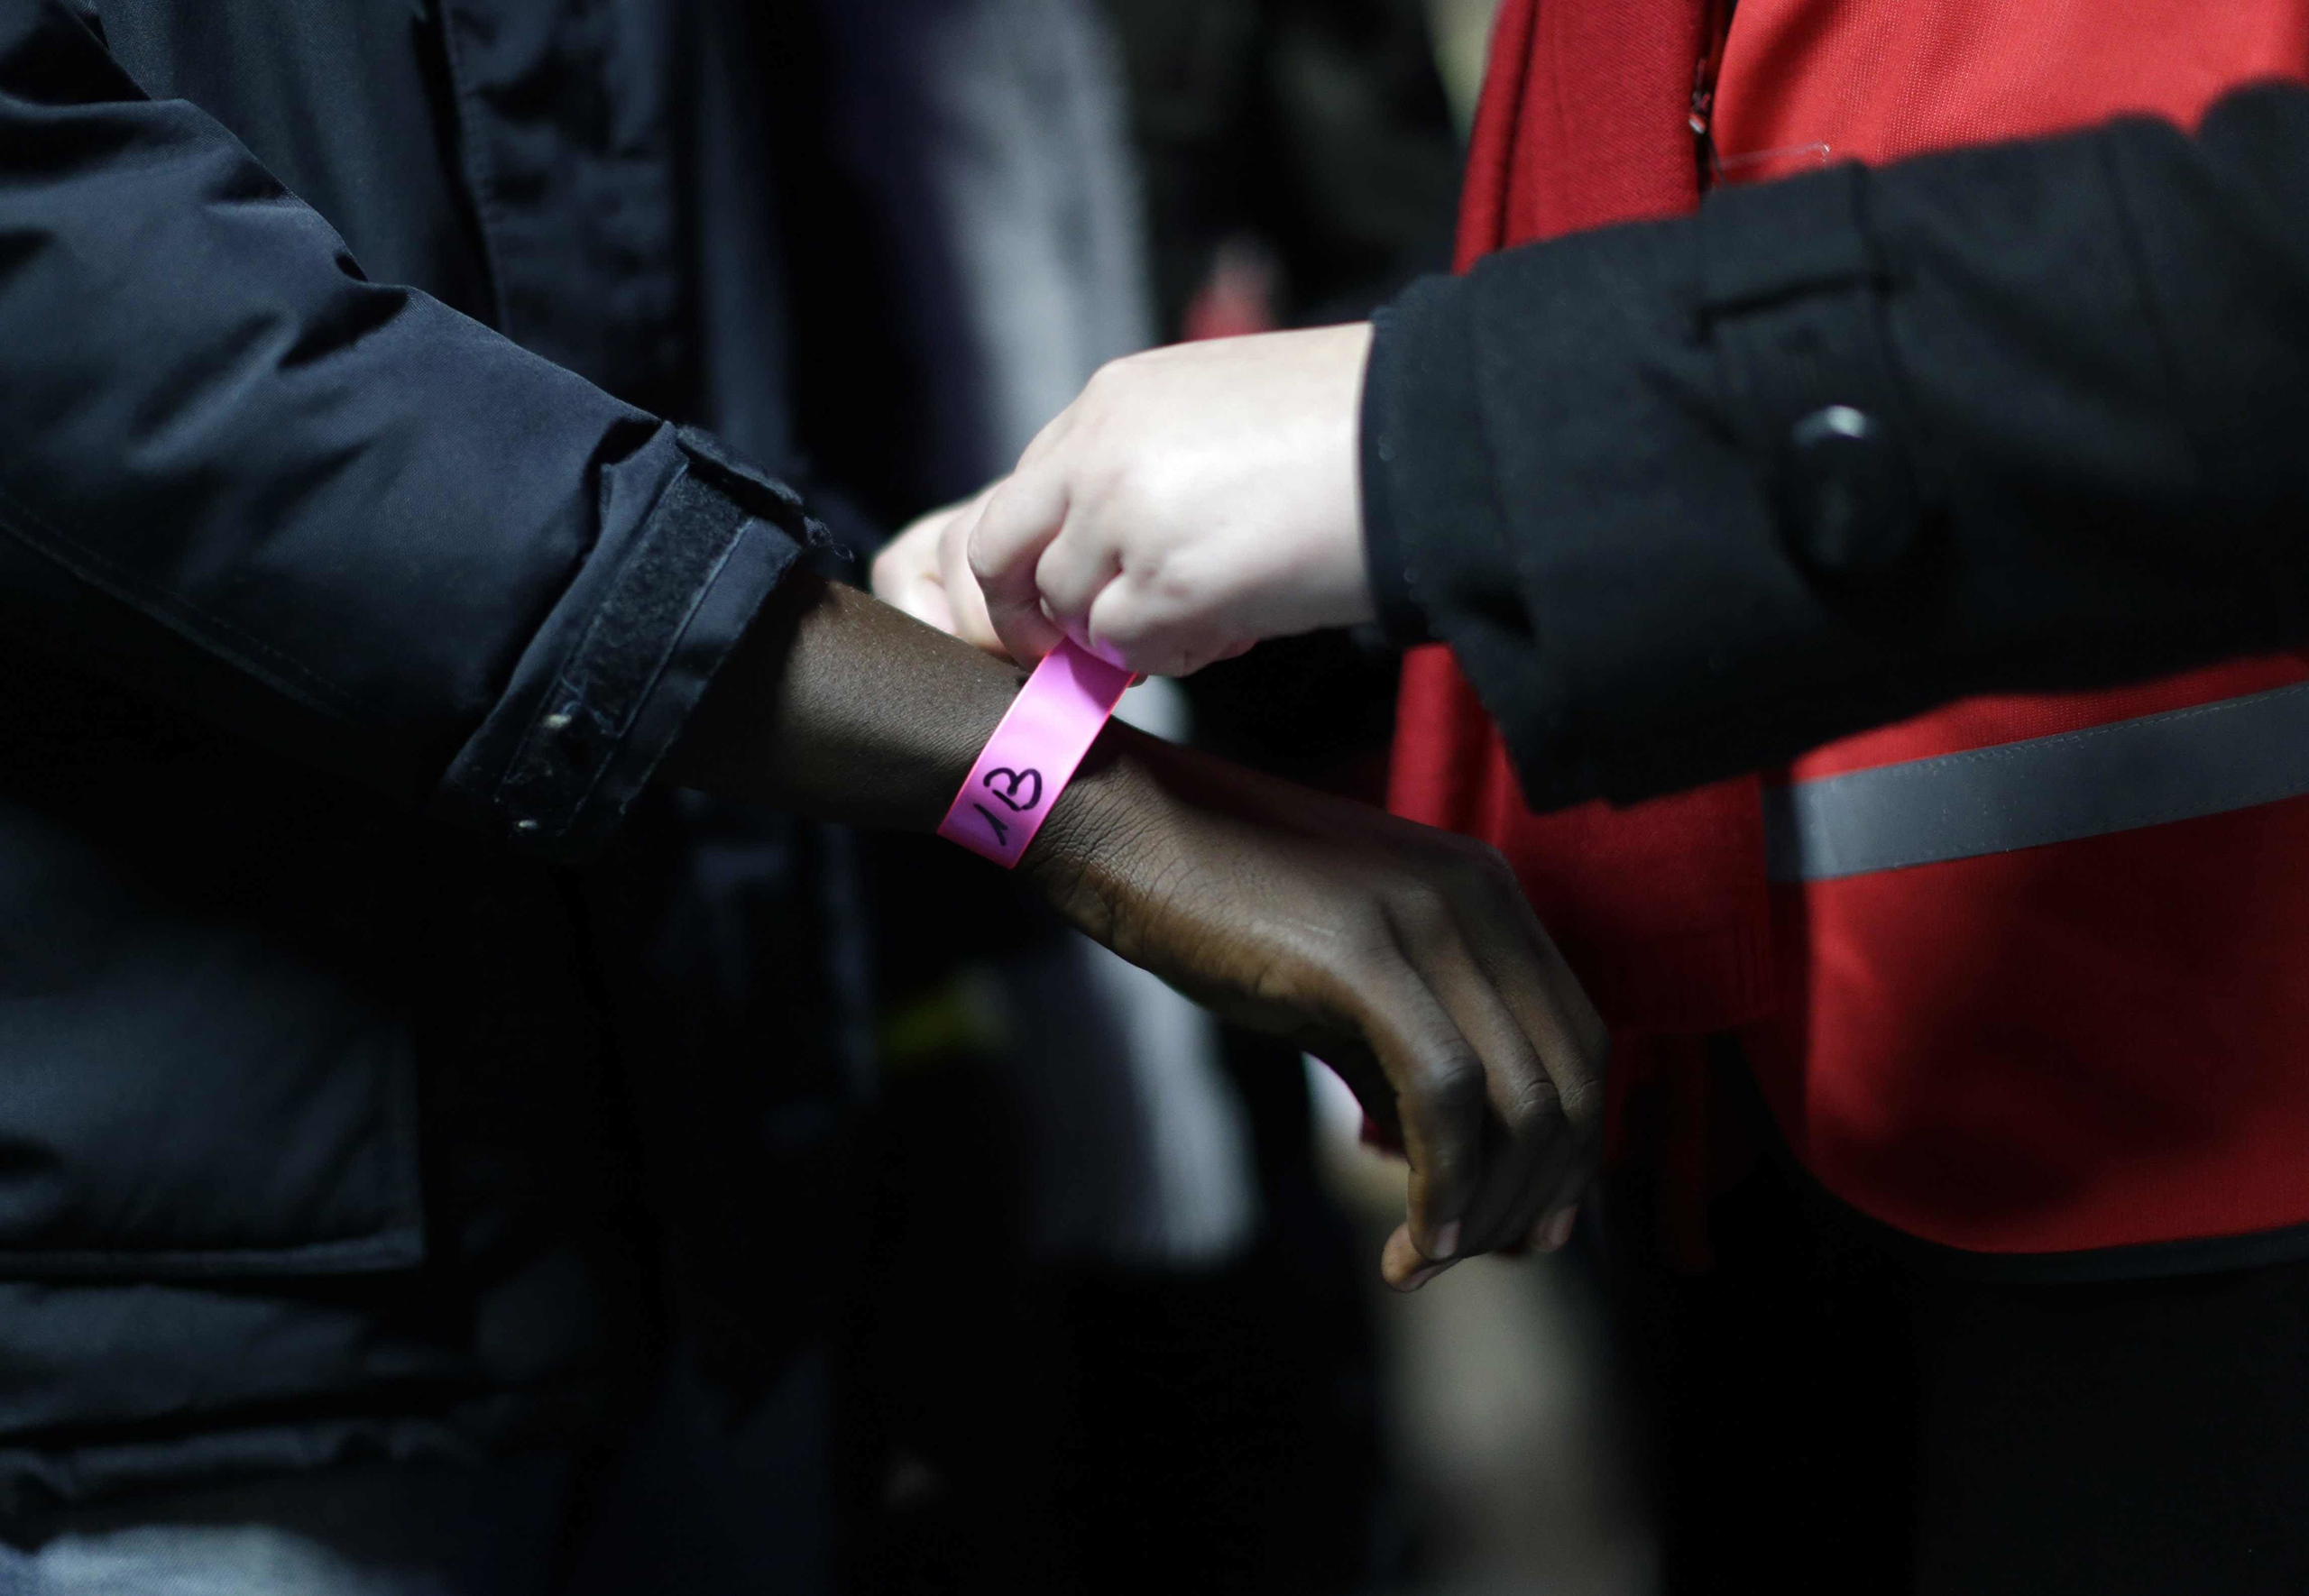 A wristband is attached to a migrant at a processing center in the makeshift migrant camp known as  the Jungle,  near Calais, northern France, on Oct. 24, 2016.